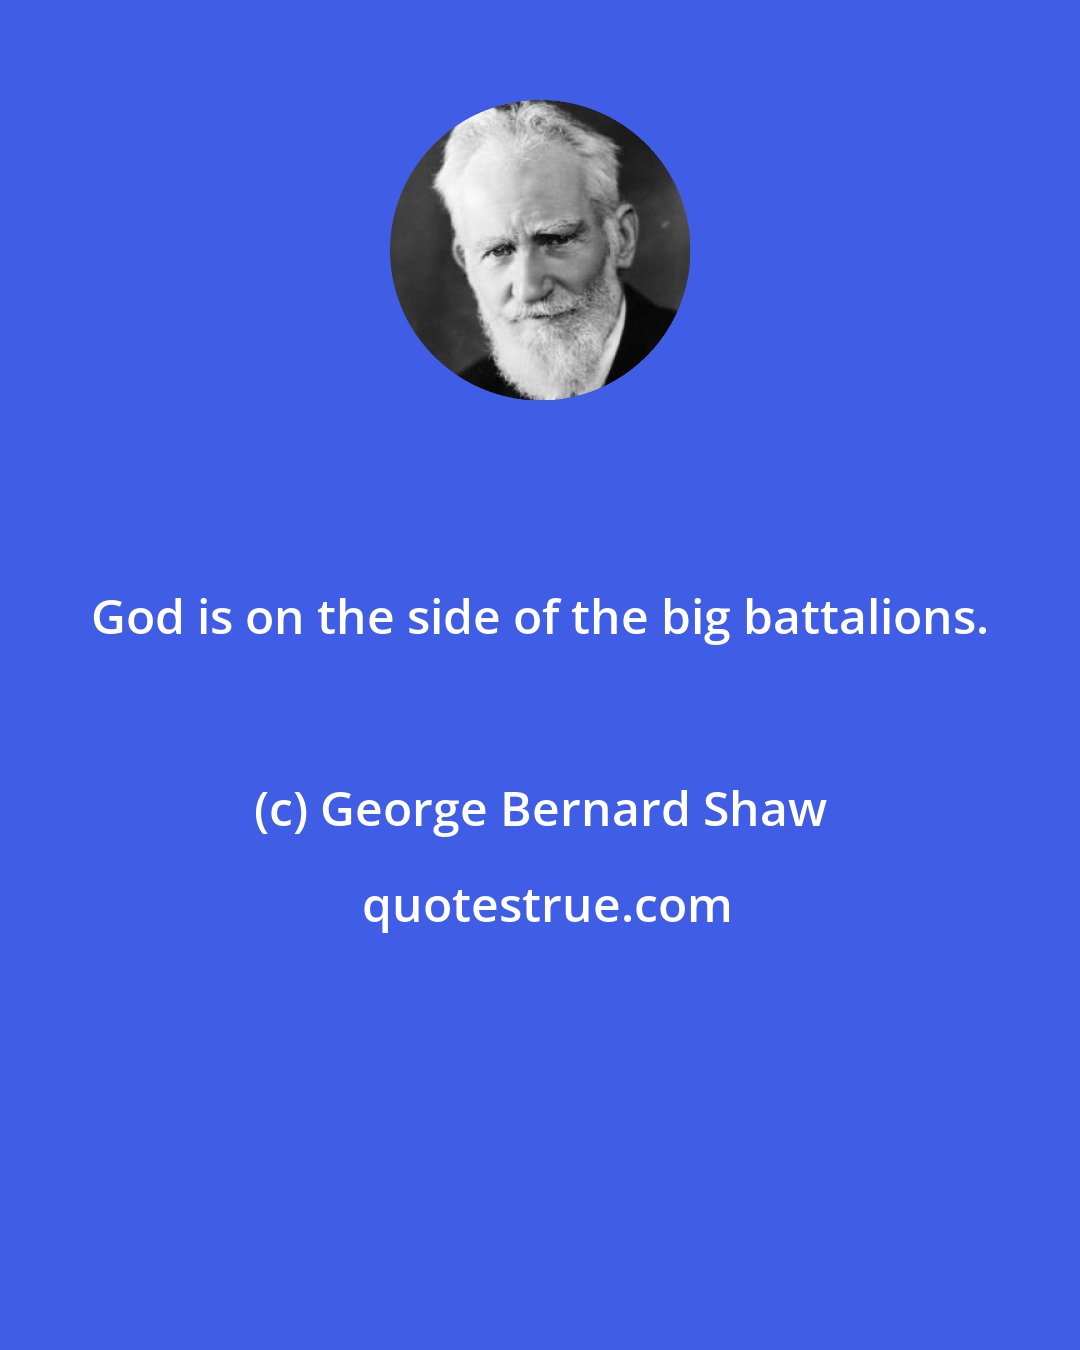 George Bernard Shaw: God is on the side of the big battalions.